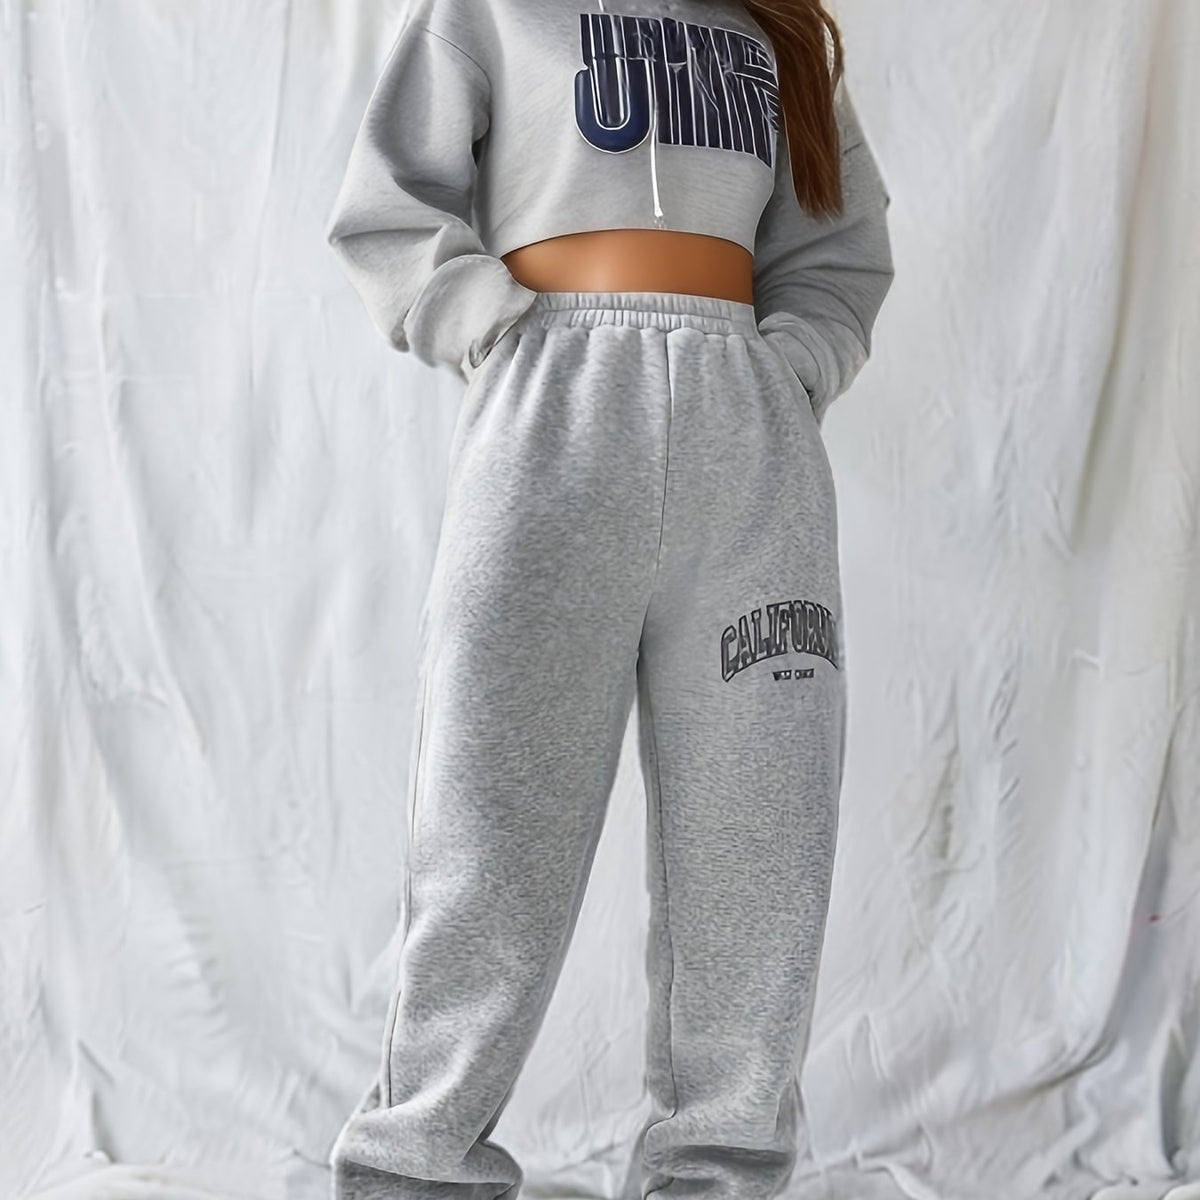 dunnmall  Letter Graphic Elastic Waist Sweatpants, Casual Sports Pants, Women's Athleisure